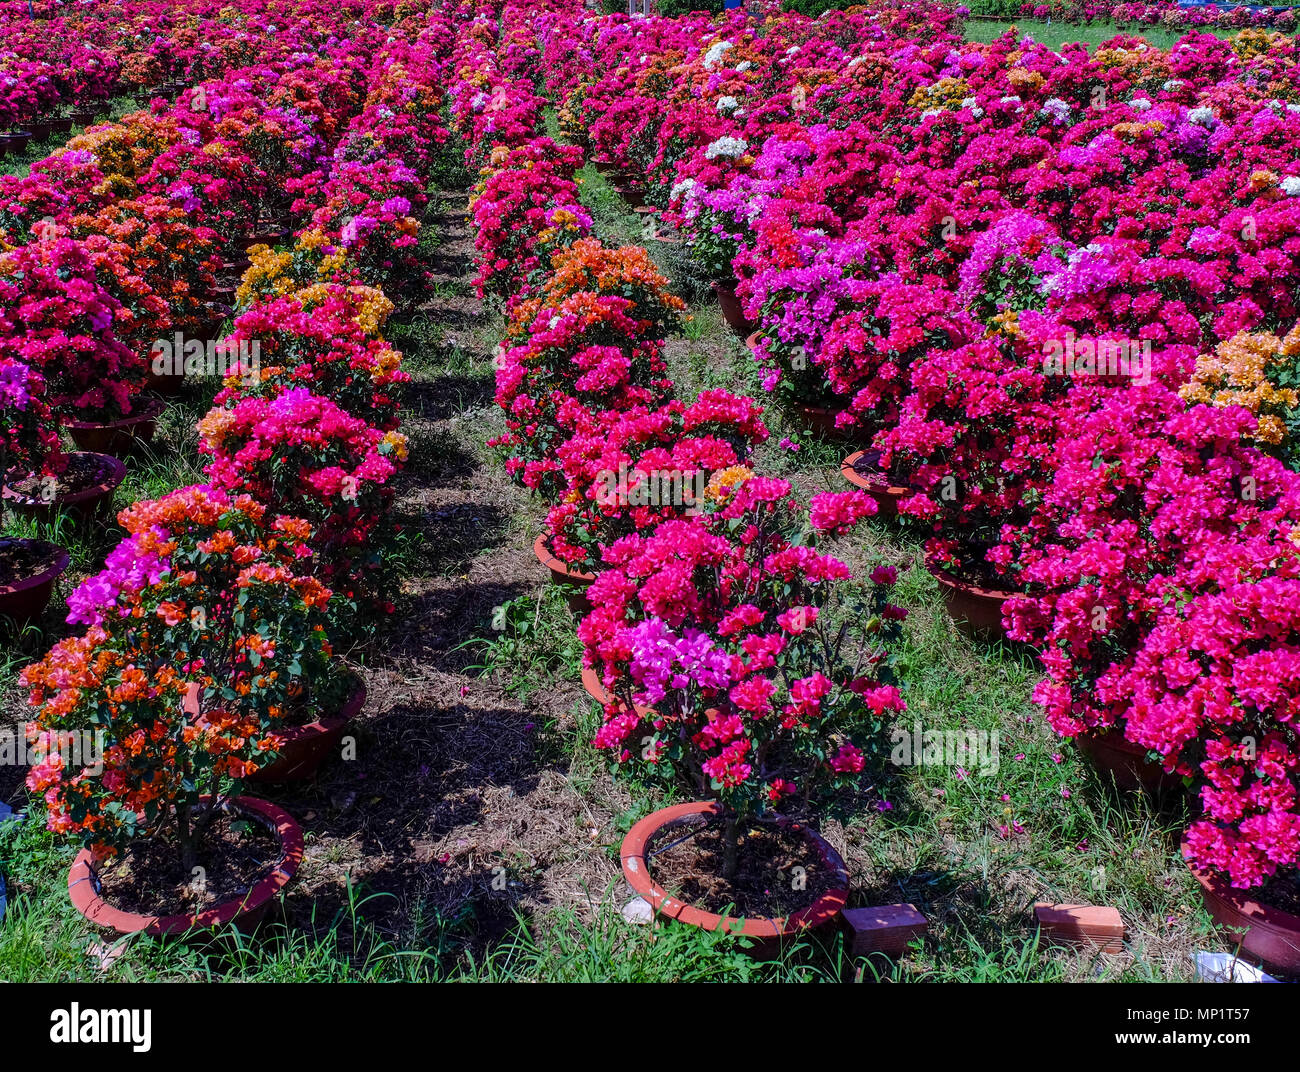 Bougainvillea flower plantation at spring time in Can Tho, Vietnam. Stock Photo